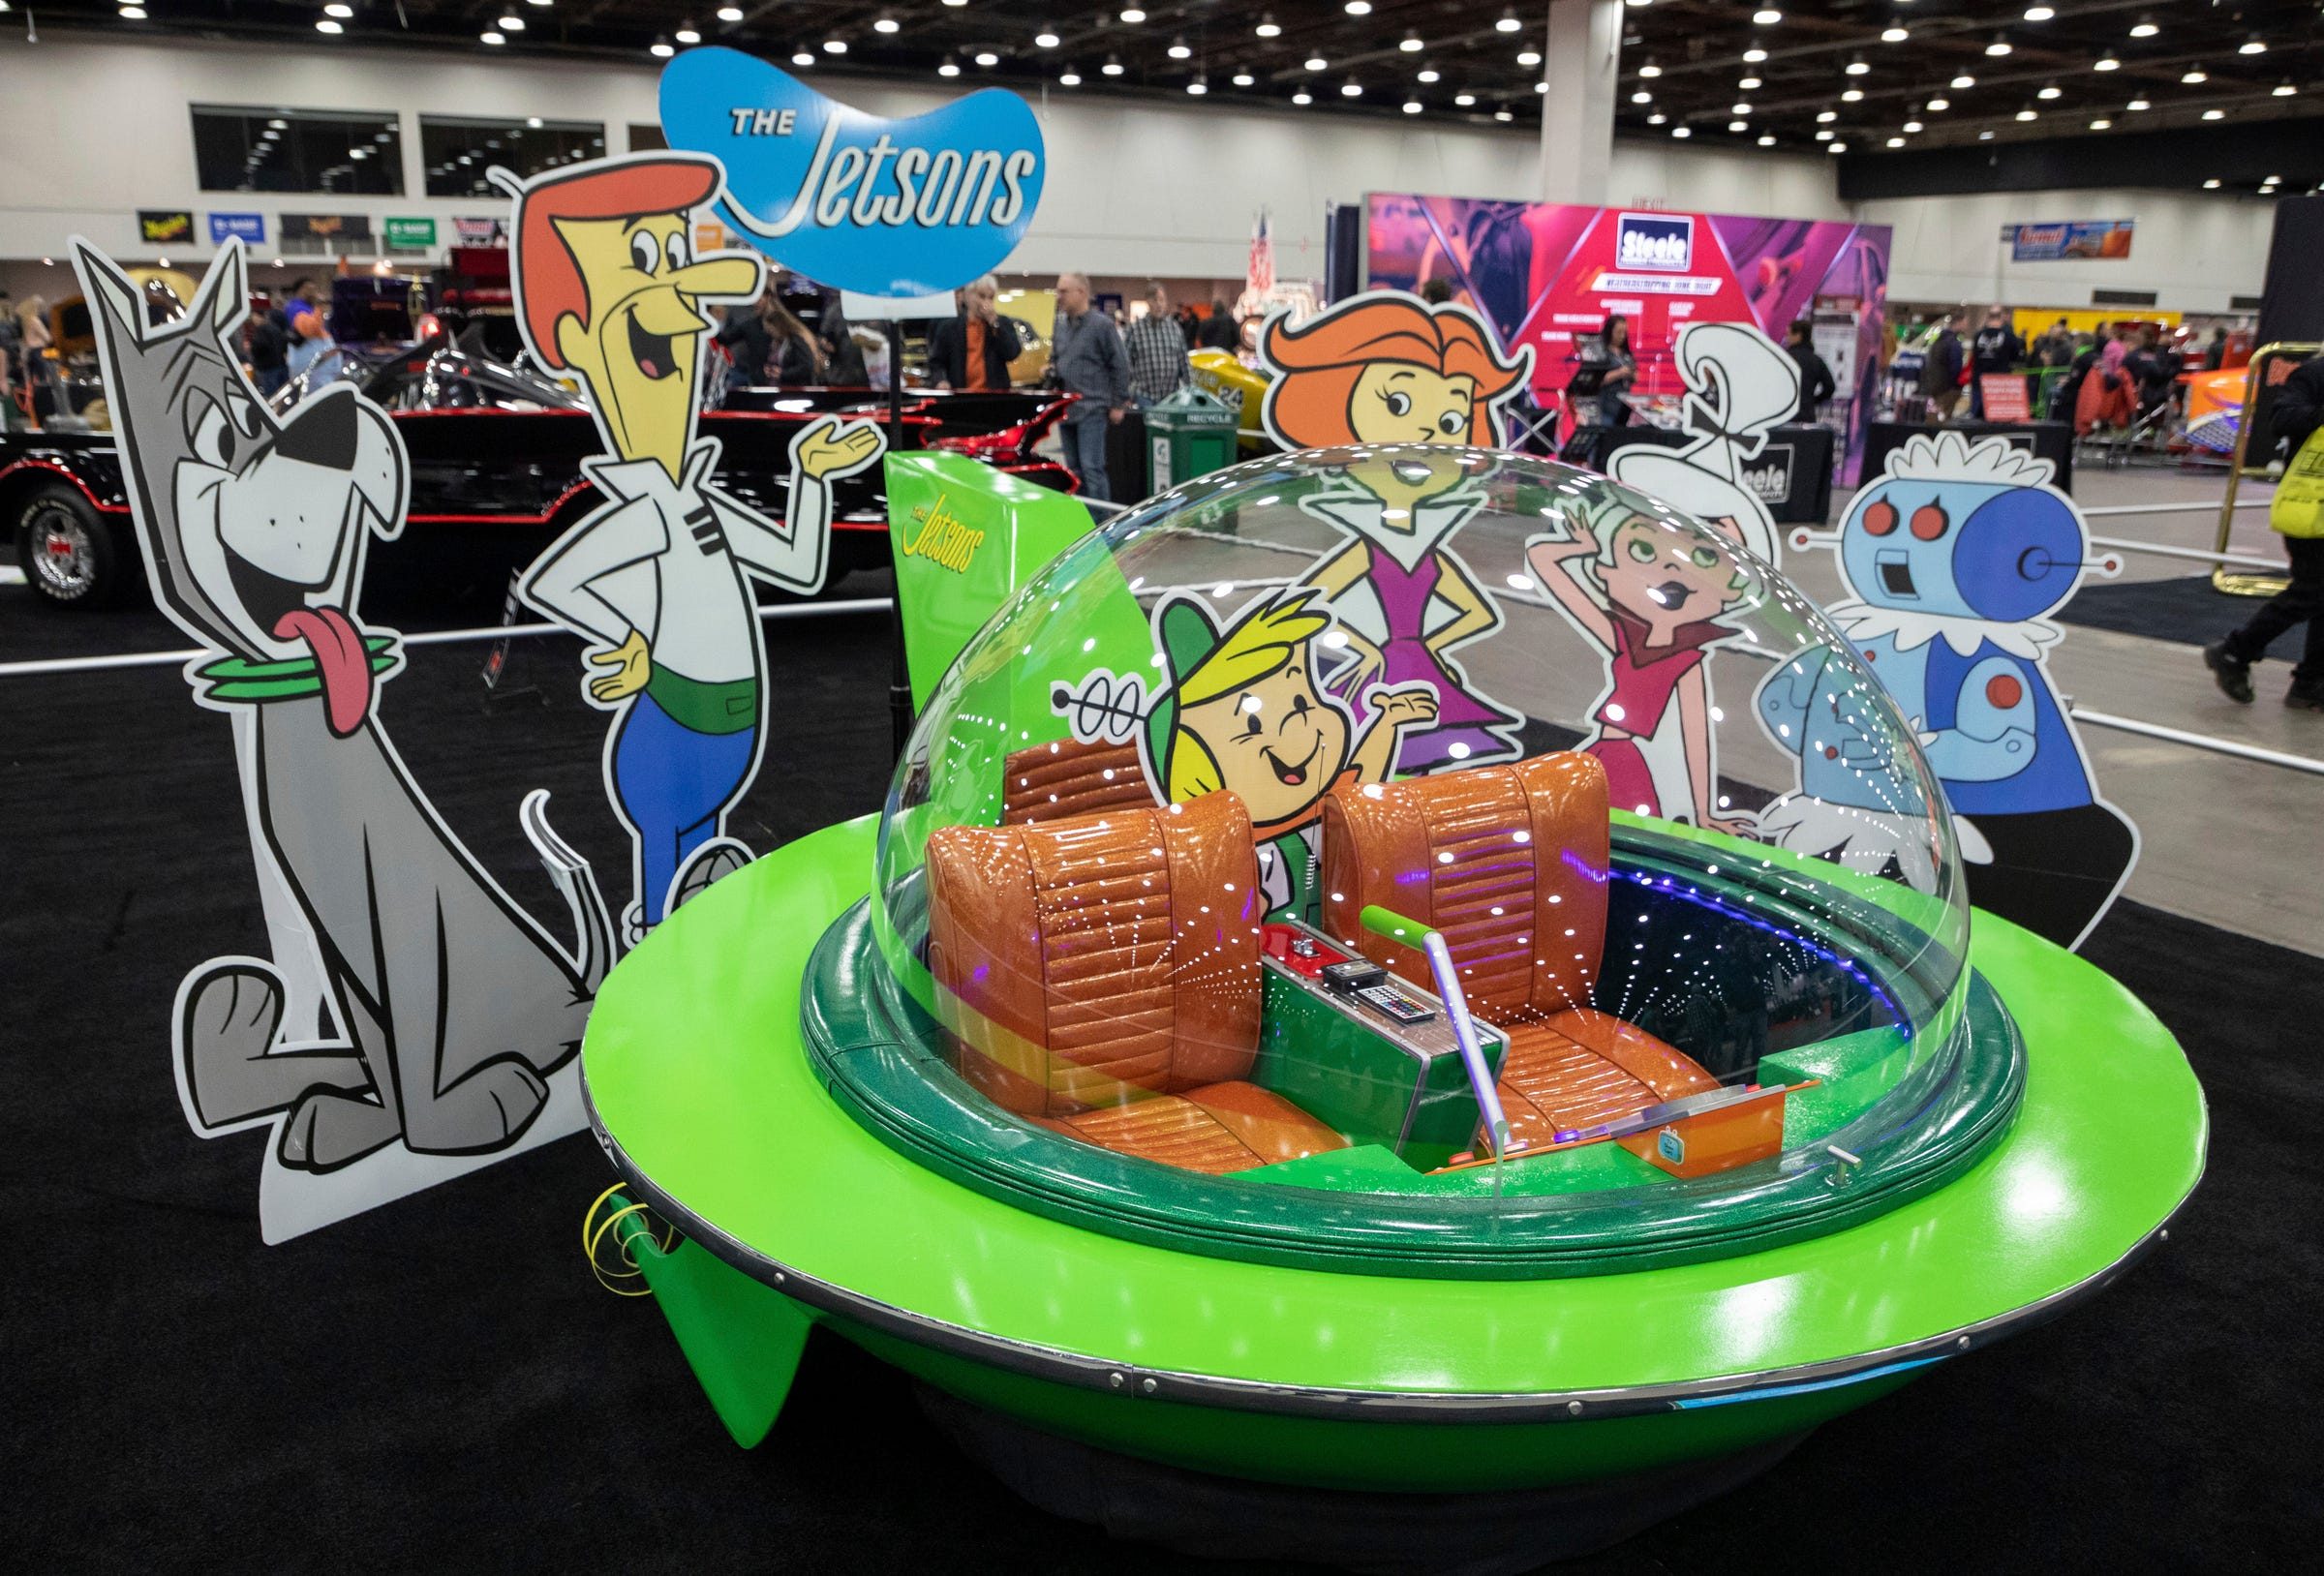 The Jetsons, pioneers of the smart home